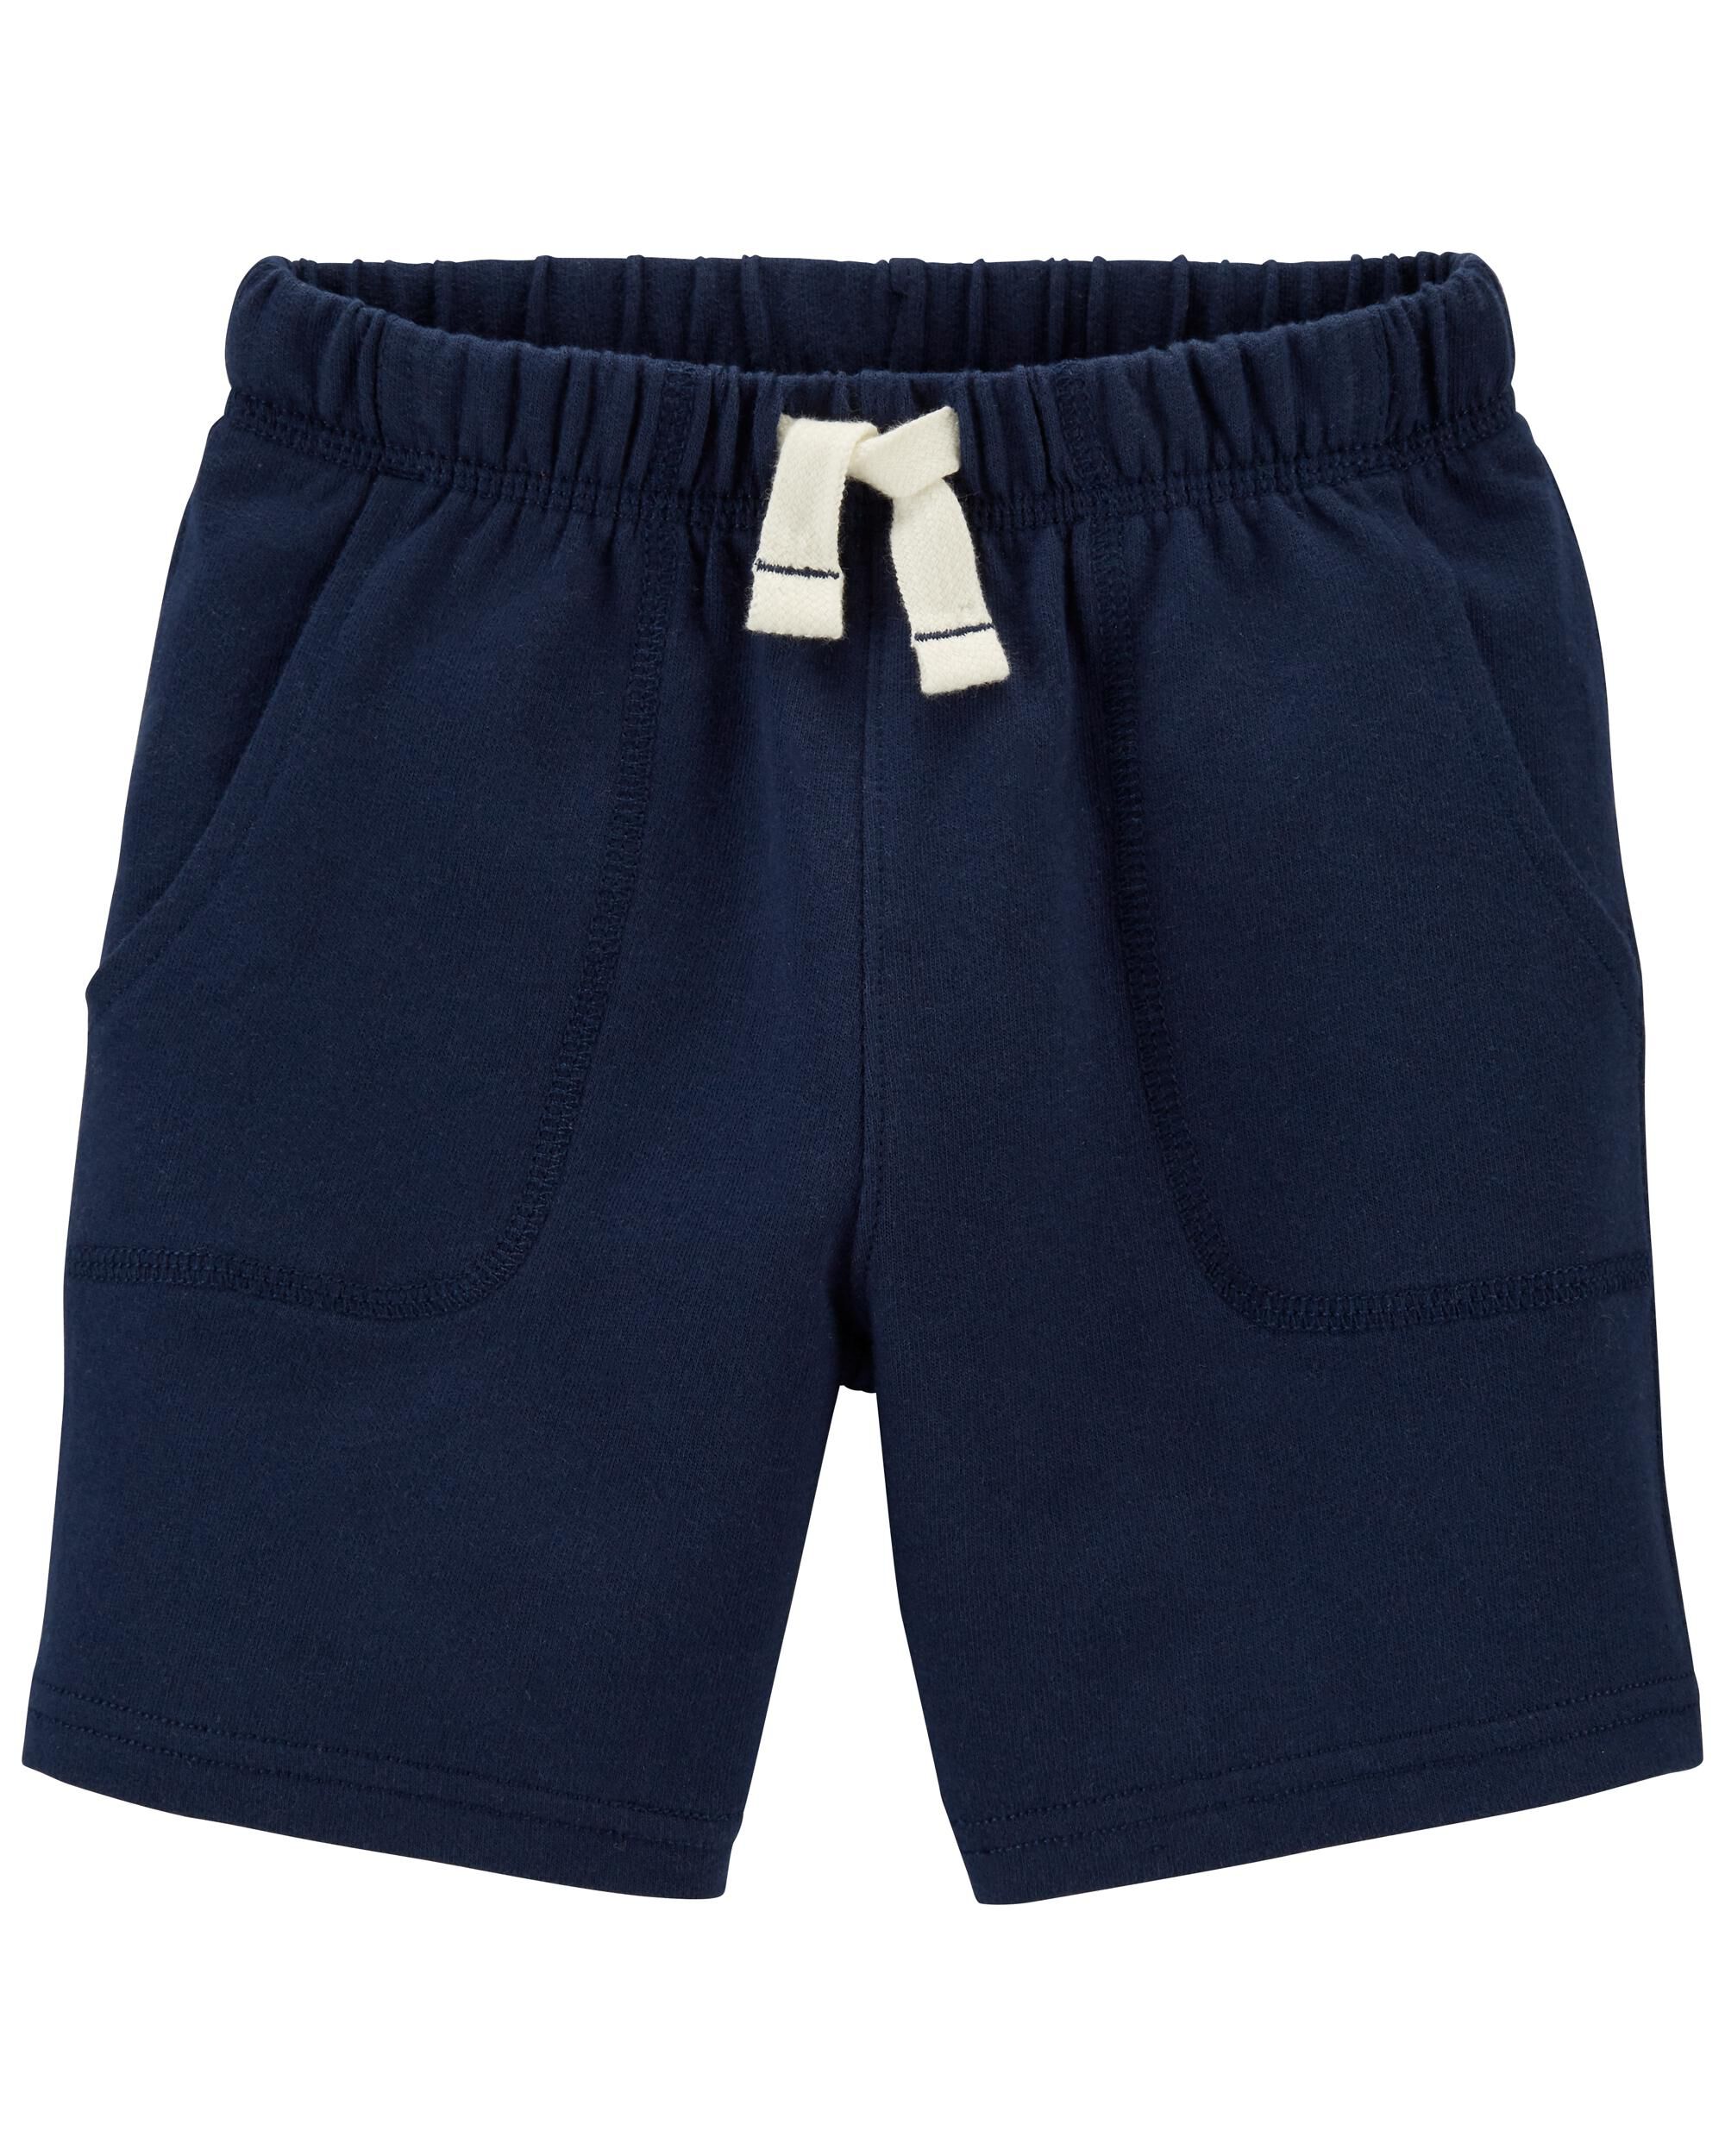 Multipacks Simple Joys by Carter's Toddlers and Baby Boys' Knit Shorts 